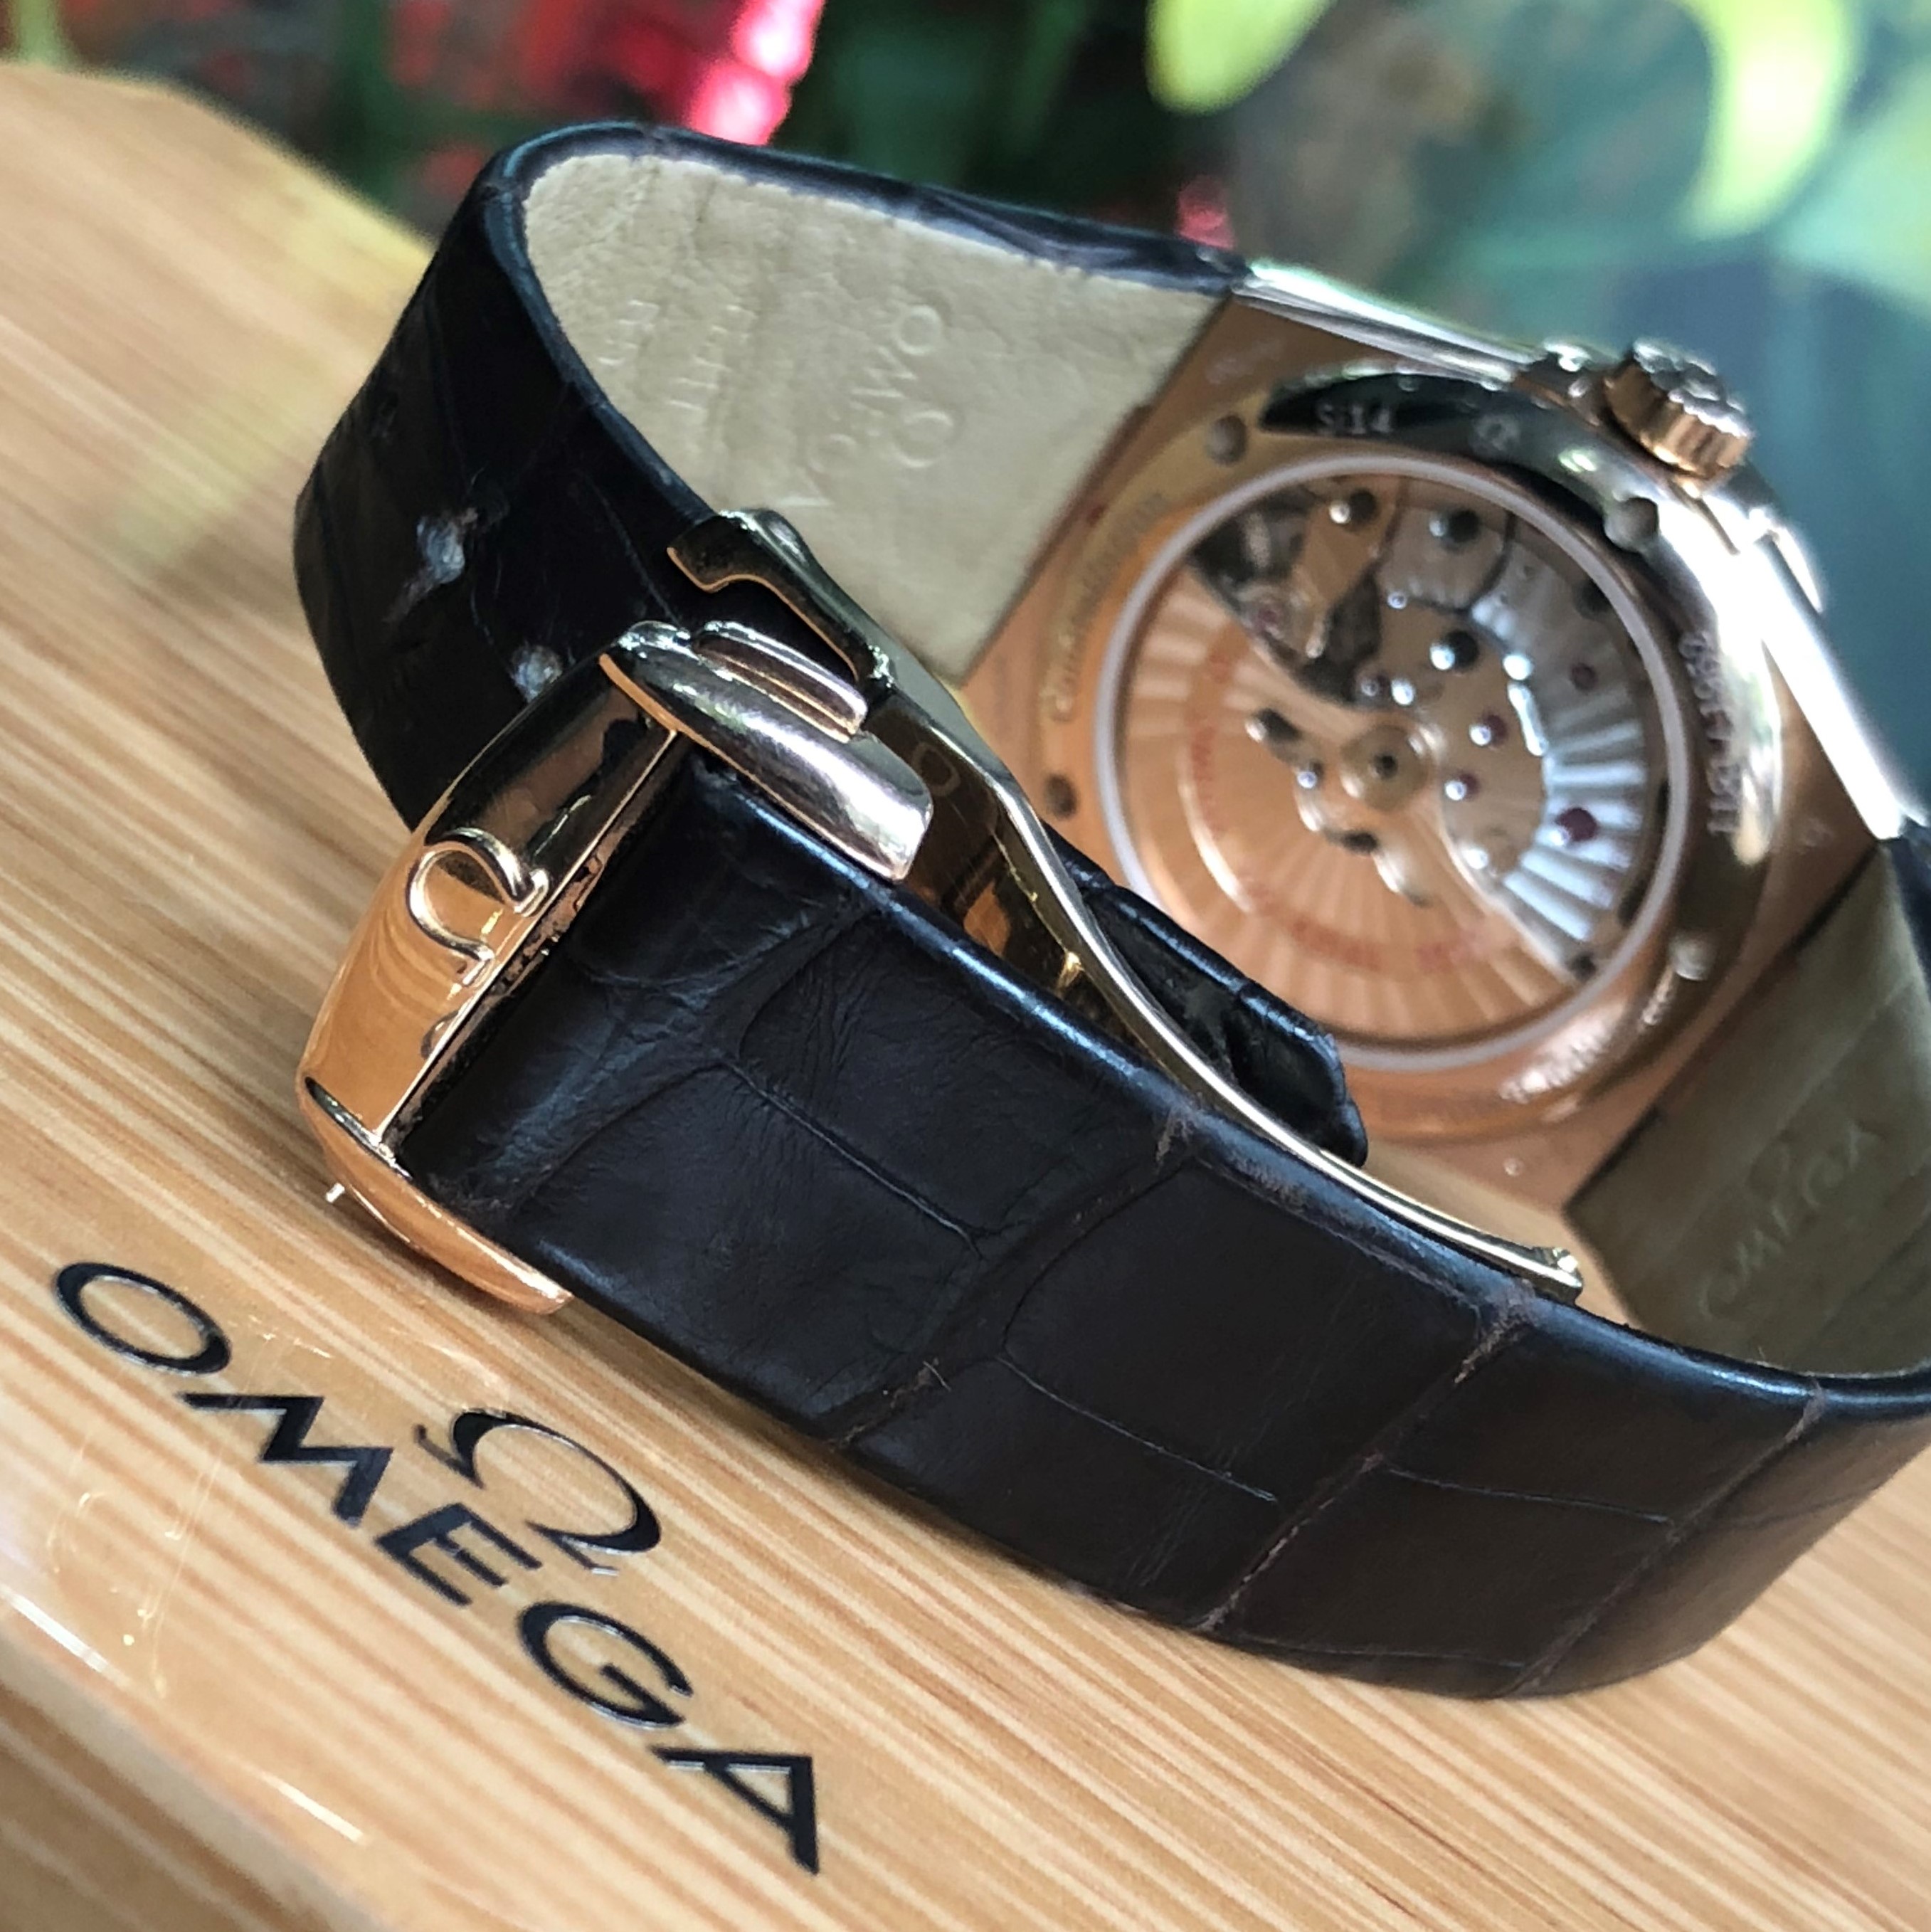 Omega Constellation Co‑Axial 123.53.38.21.02.001